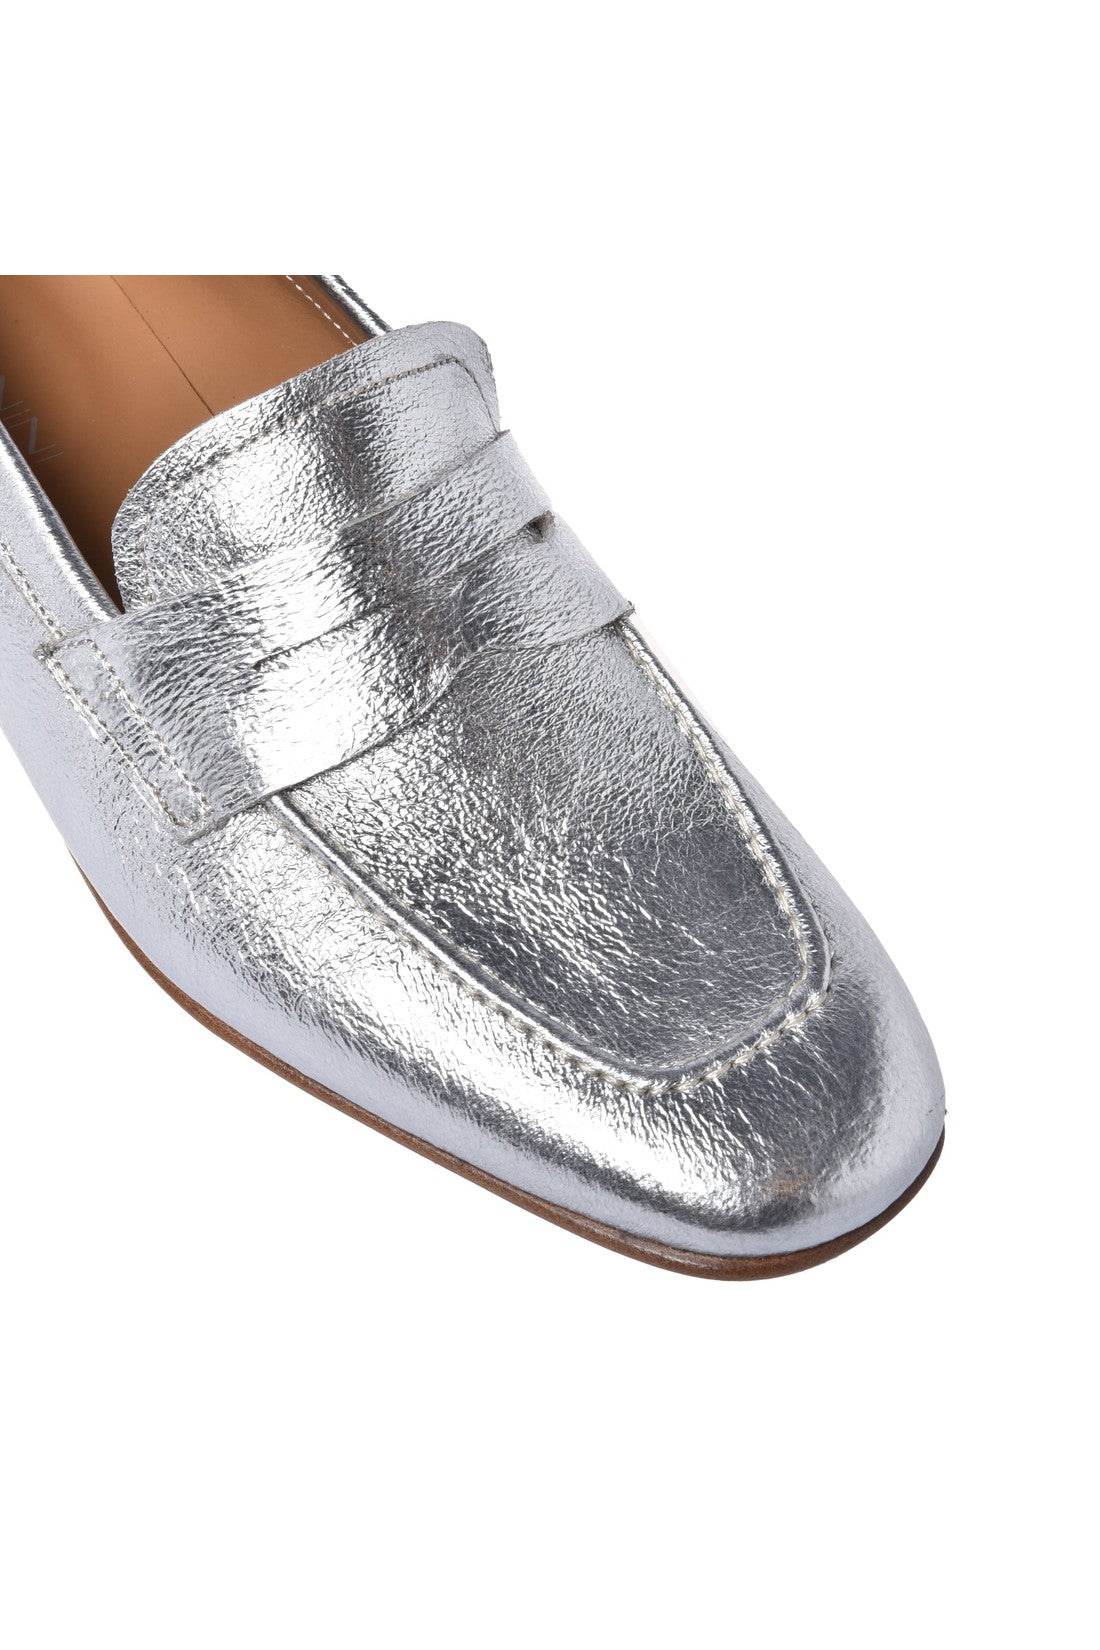 Loafer in silver laminated calfskin